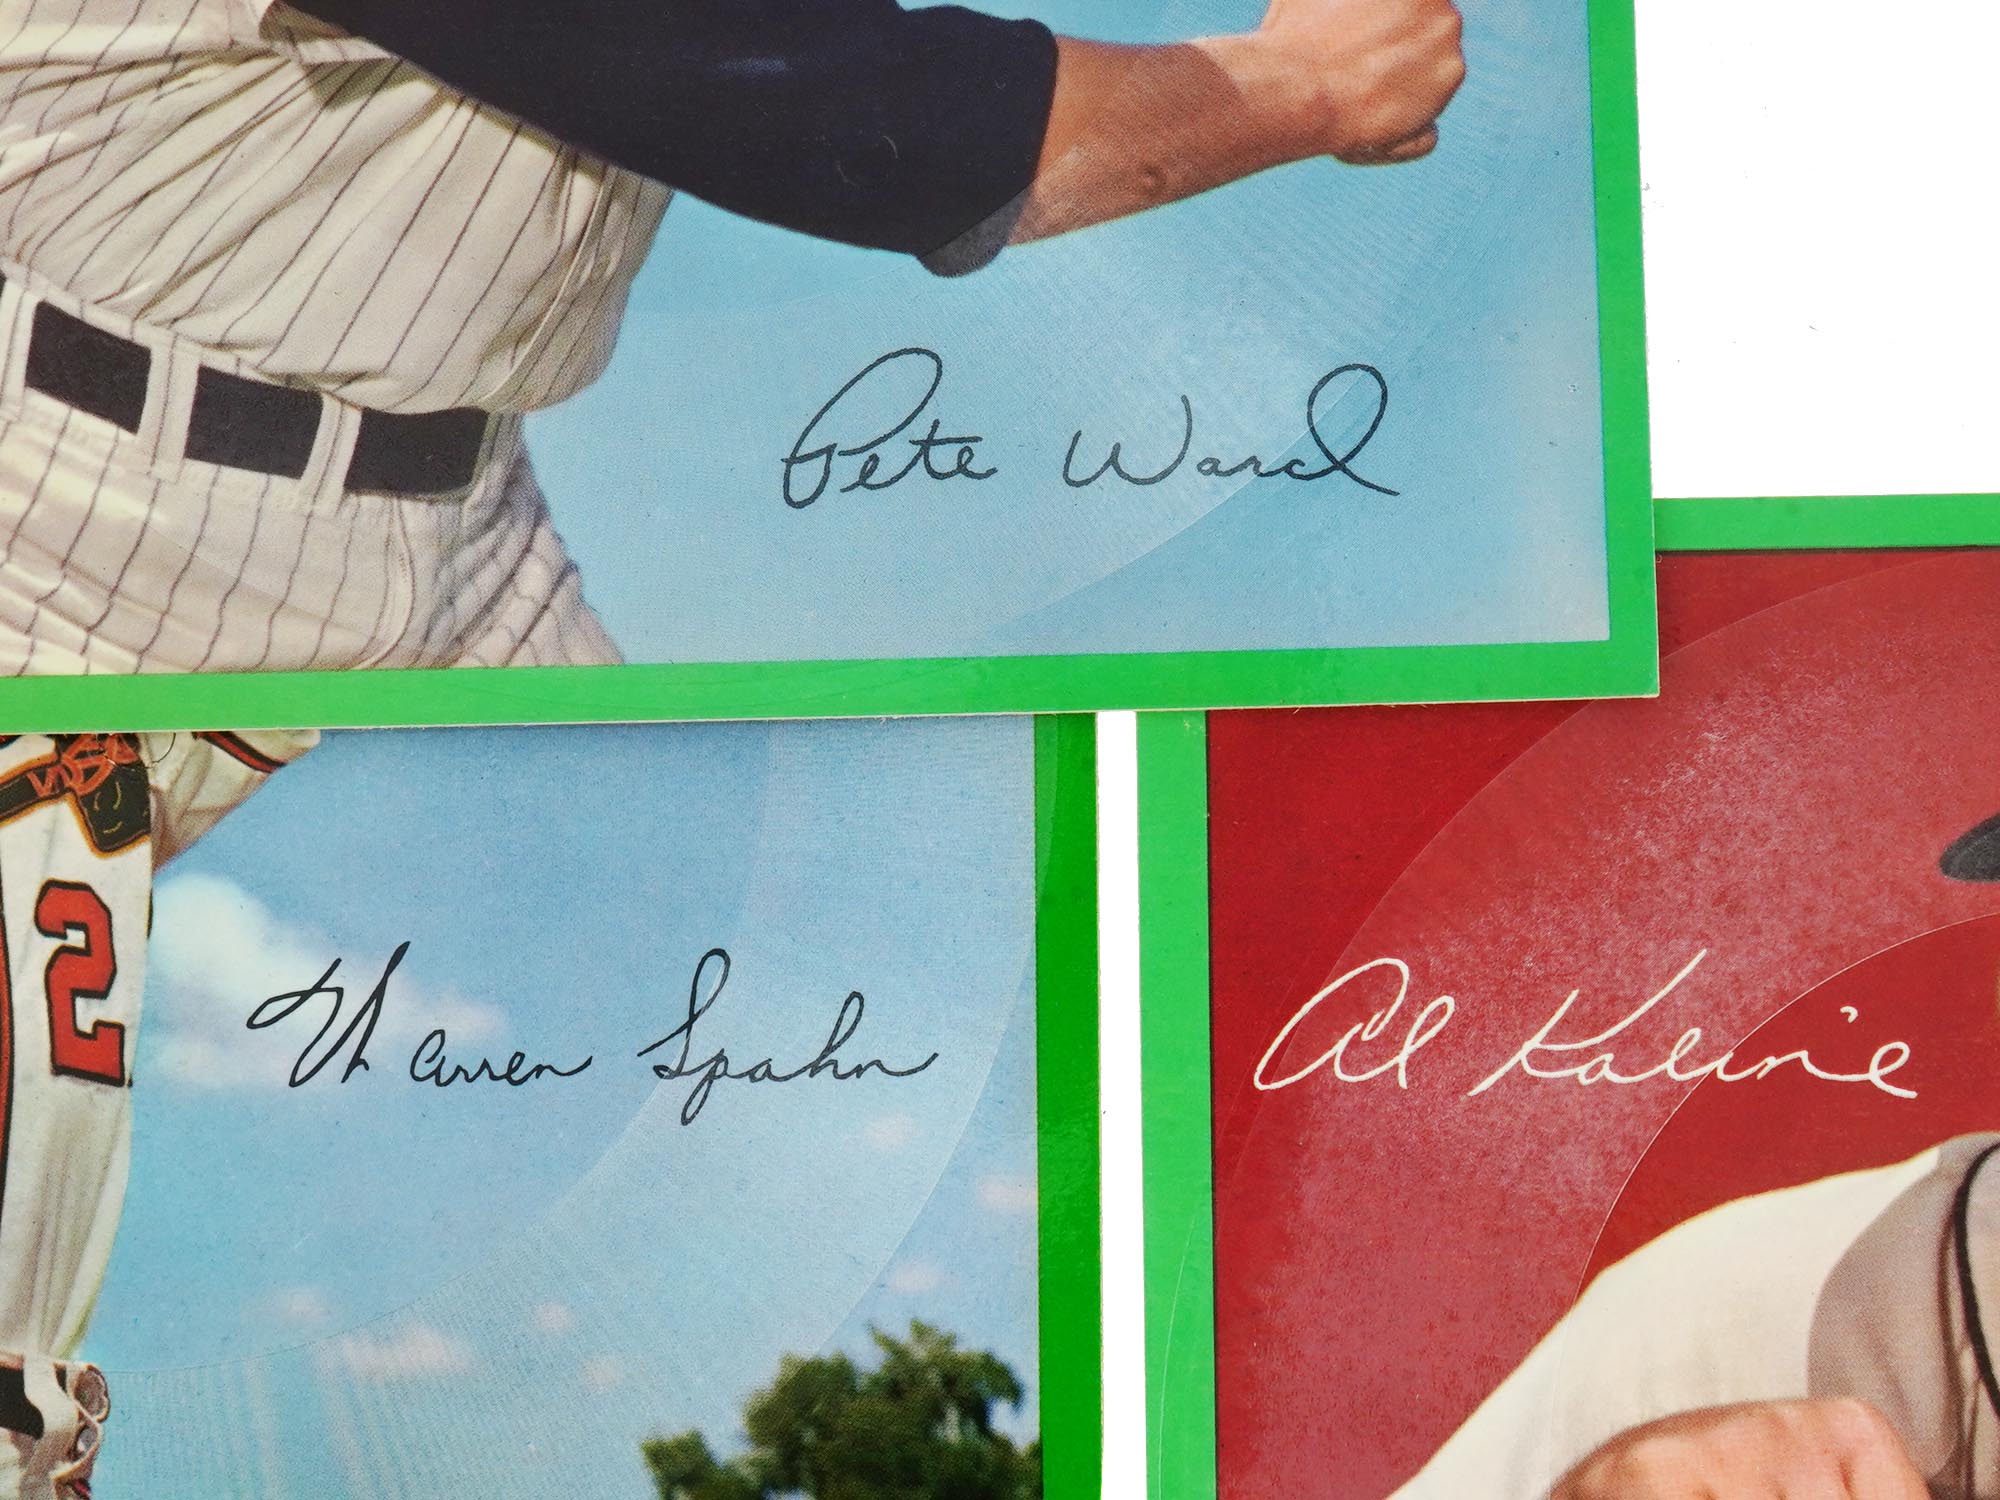 SIGNED BASEBALL CARDS WITH 1964 RECORD HOLDERS PIC-4